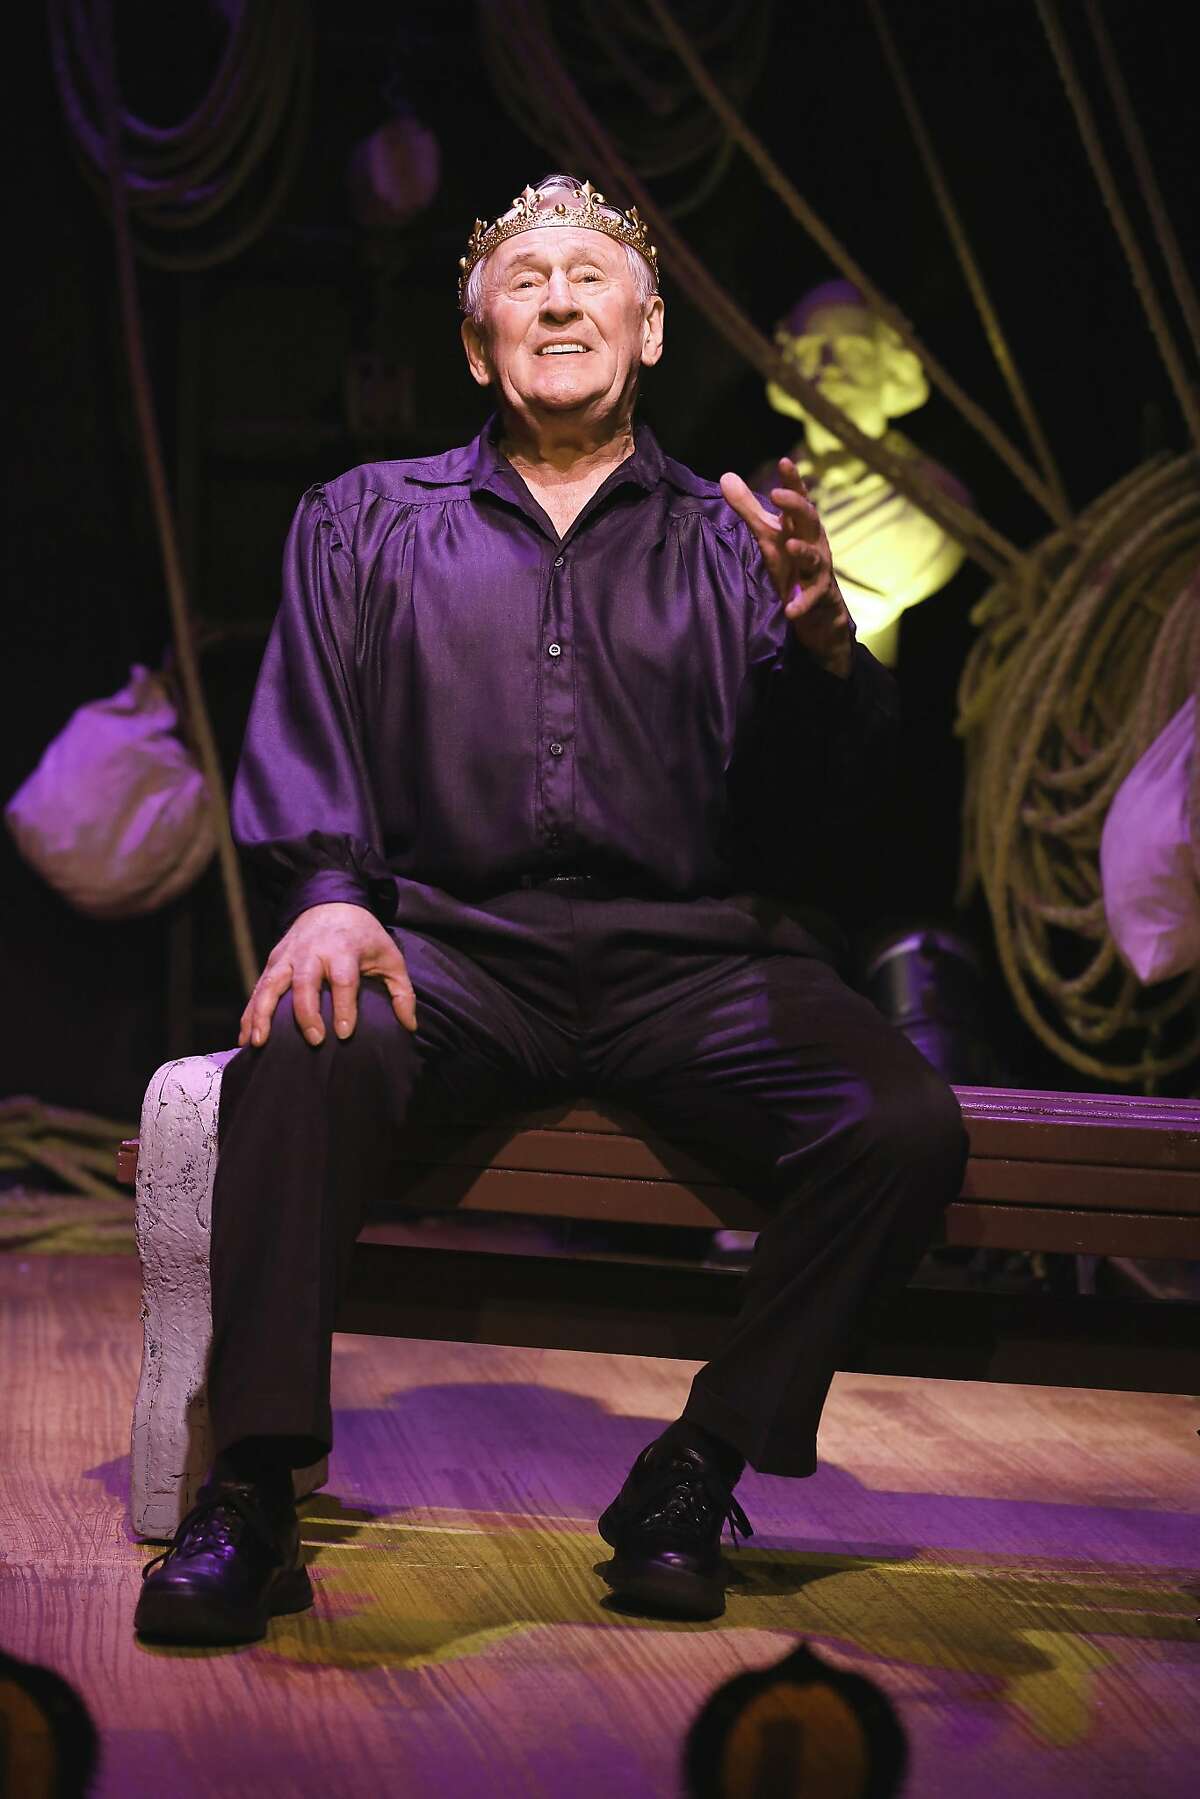 Tony� Award-winning actor Len Cariou stars in his acclaimed solo show "Broadway and the Bard: An Evening of Shakespeare & Song," presented at the Lesher Center for the Arts in a limited engagement June 21-24, 2018. Photo credit: Carol Rosegg